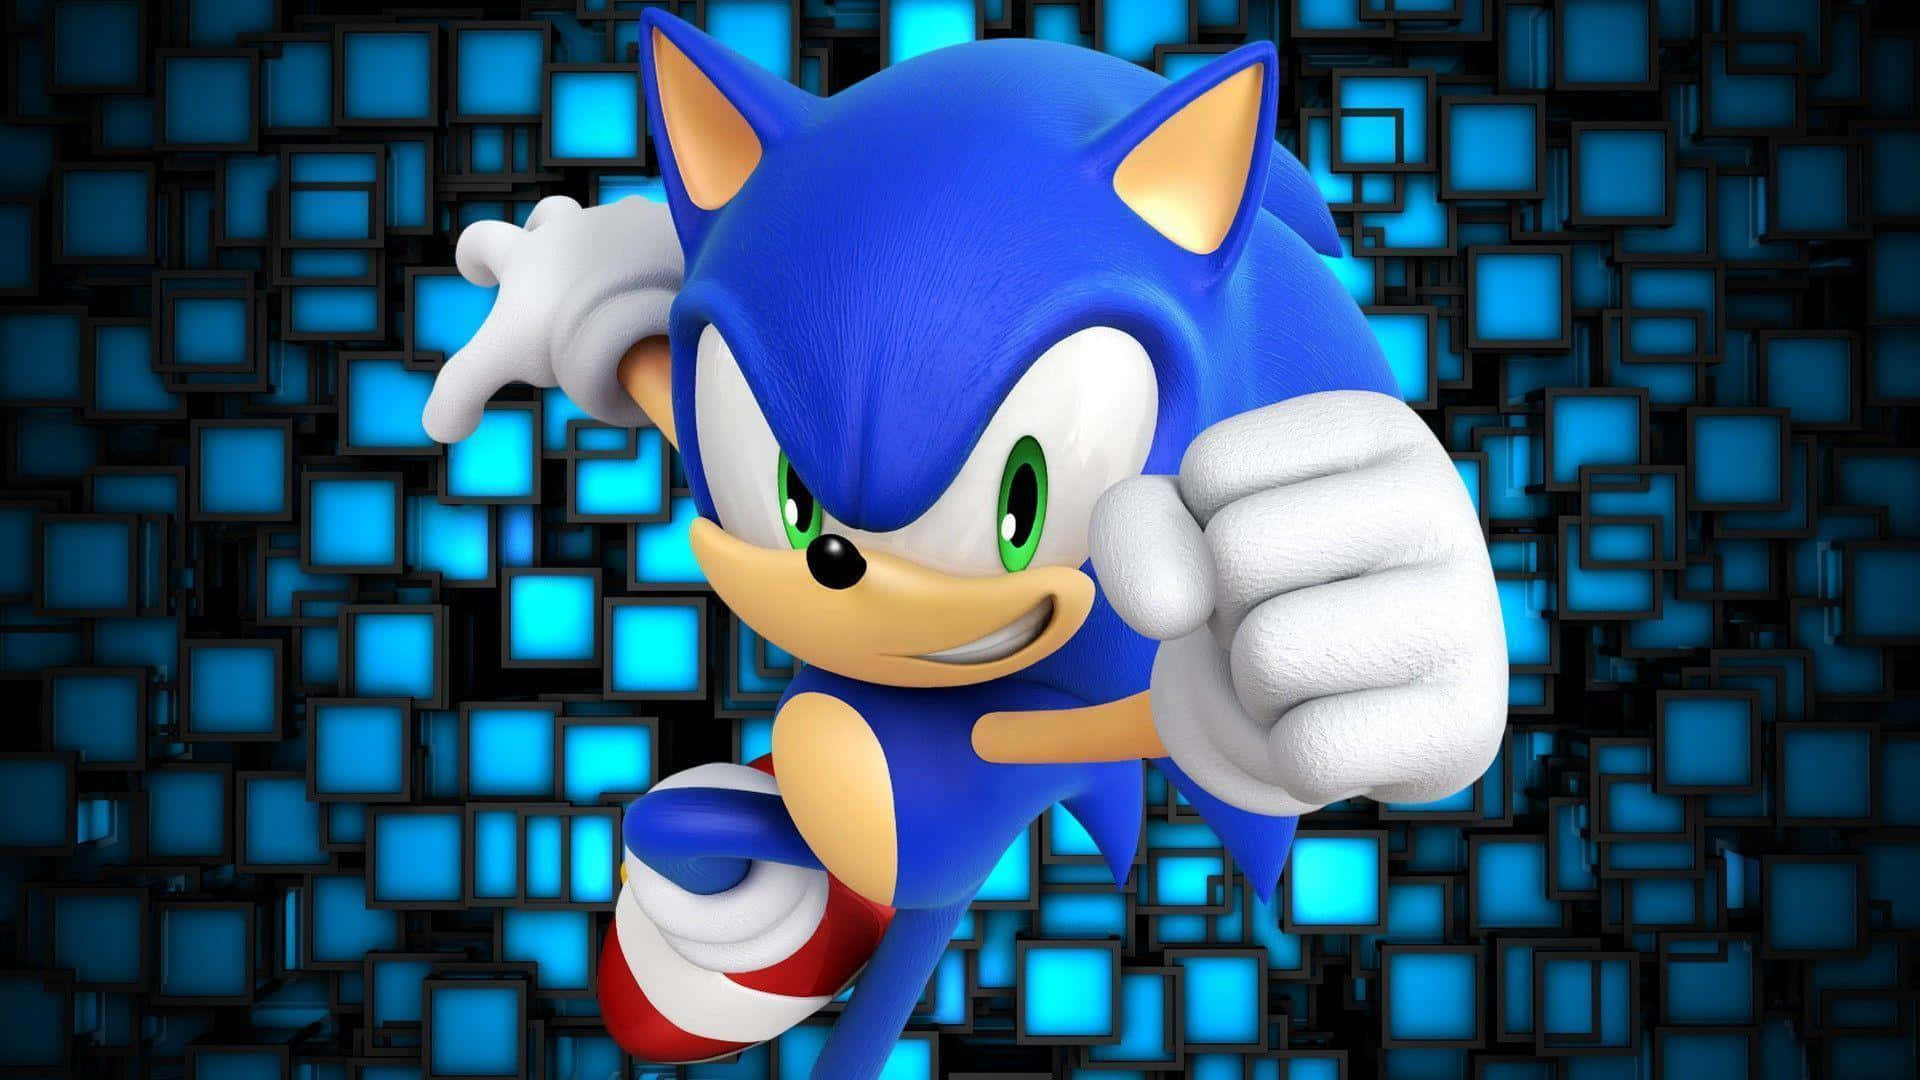 Classic Sonic is Ready to Take On Any Obstacle!